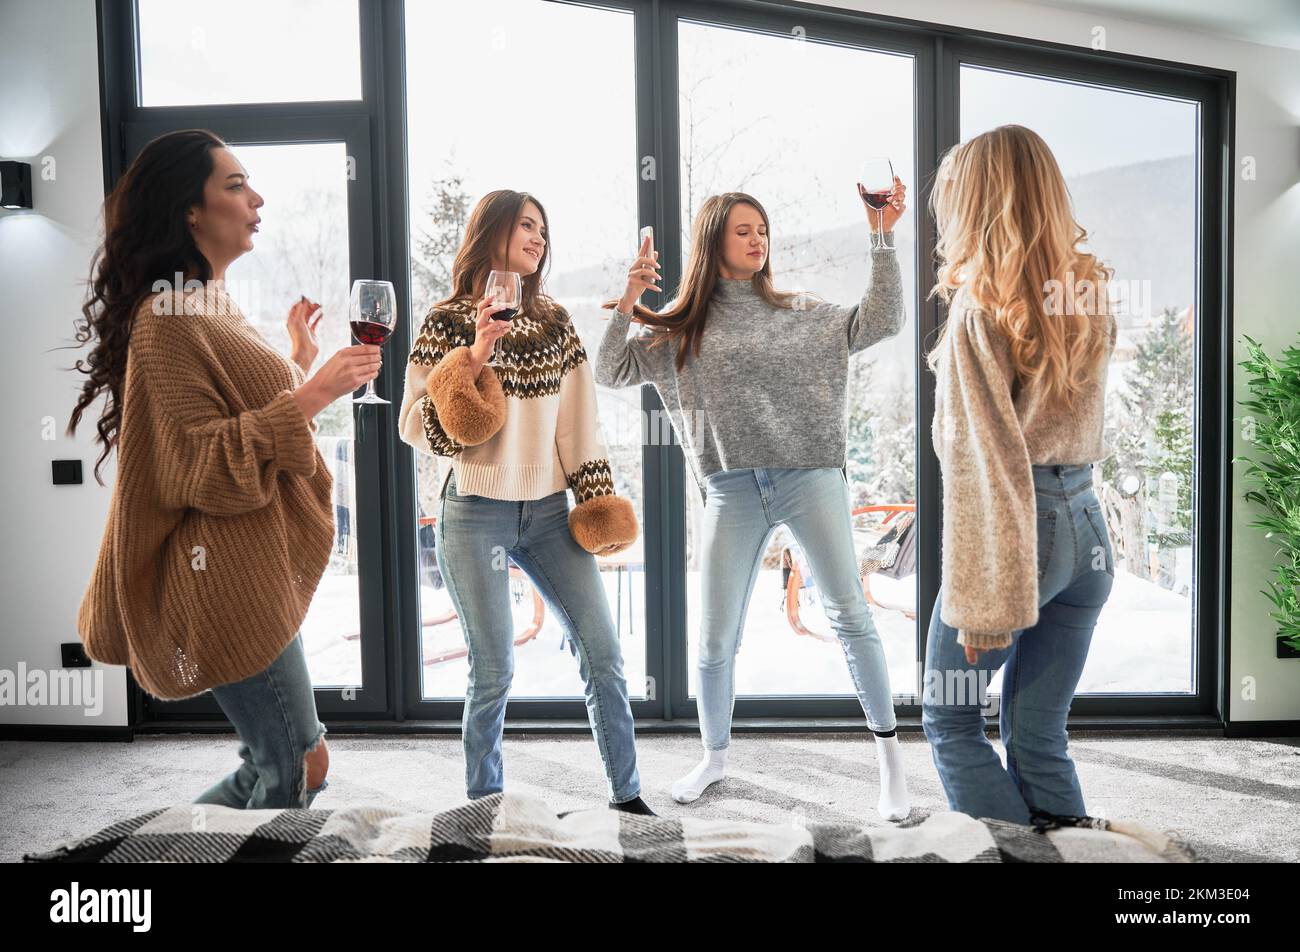 Young women enjoying winter weekends inside contemporary barn house. Four girls having fun and drinking red wine. Stock Photo